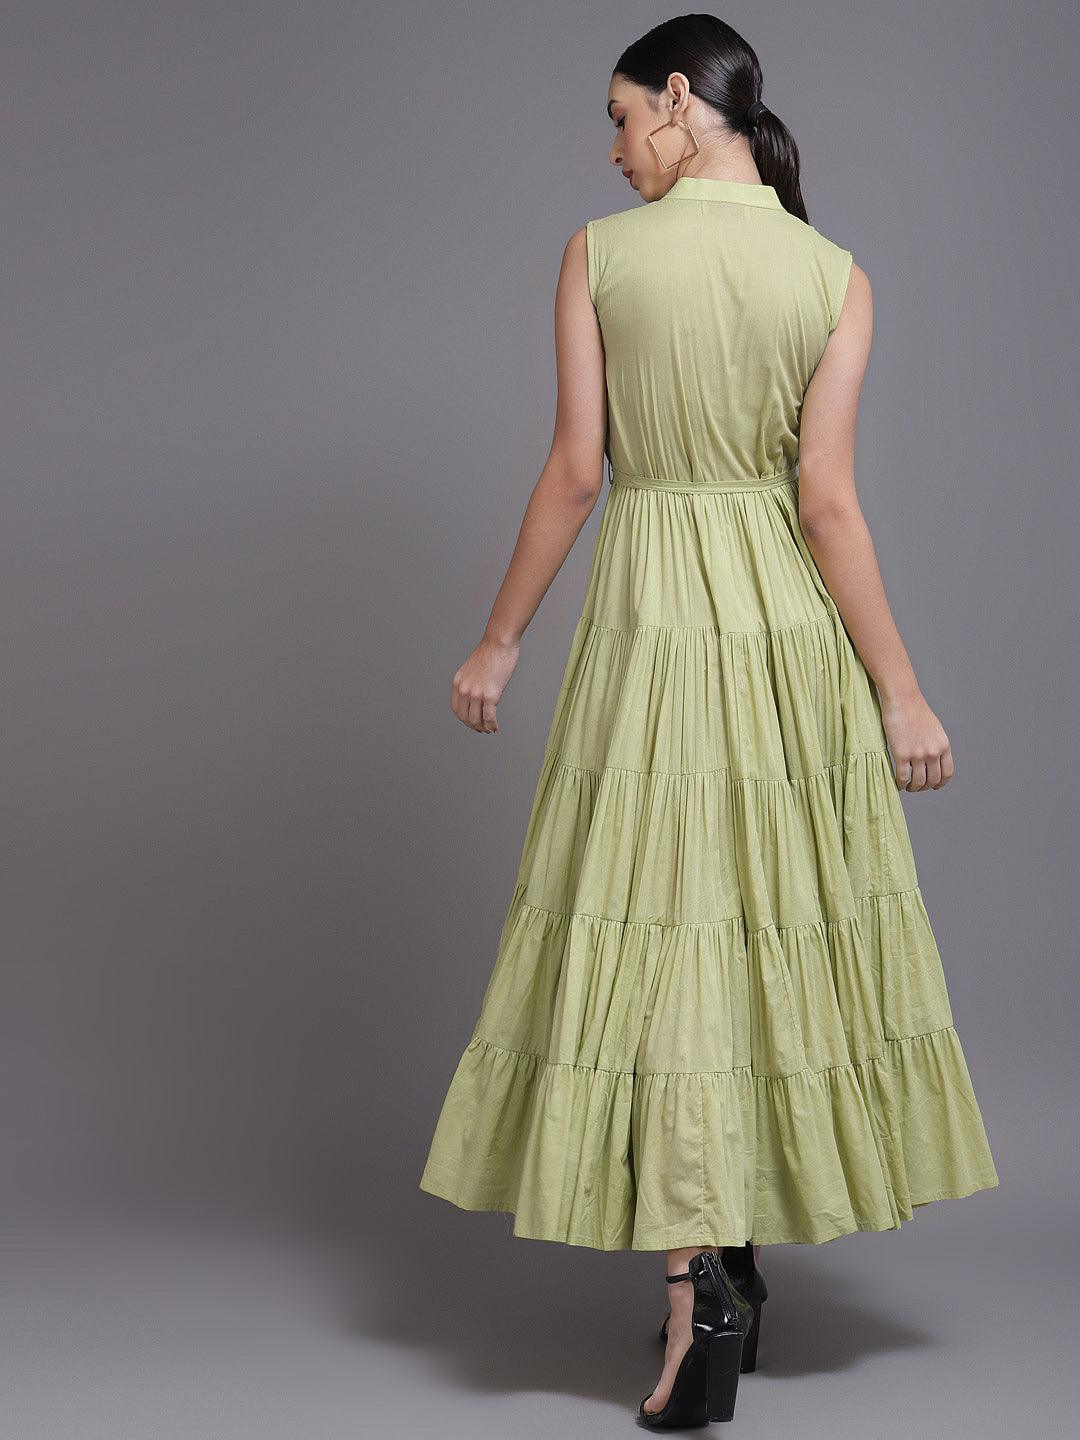 Lime Green Solid Cotton Dress - Libas